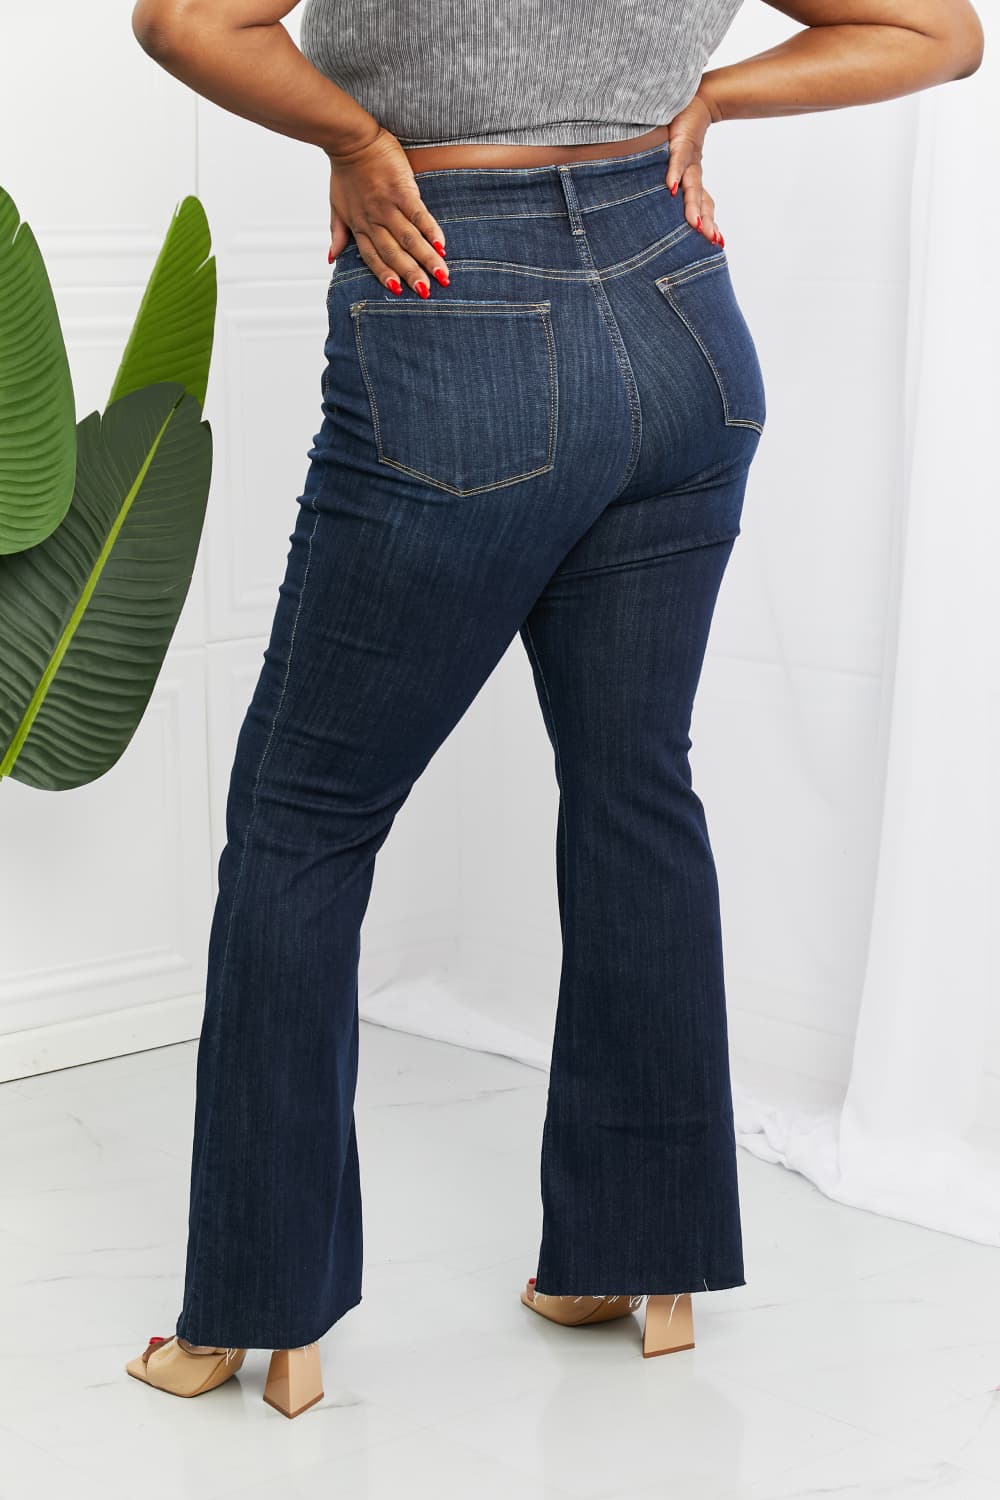 Back View, Plus Size, Judy Blue, High Waisted Raw Hem Tall Flare Jeans Style 82343